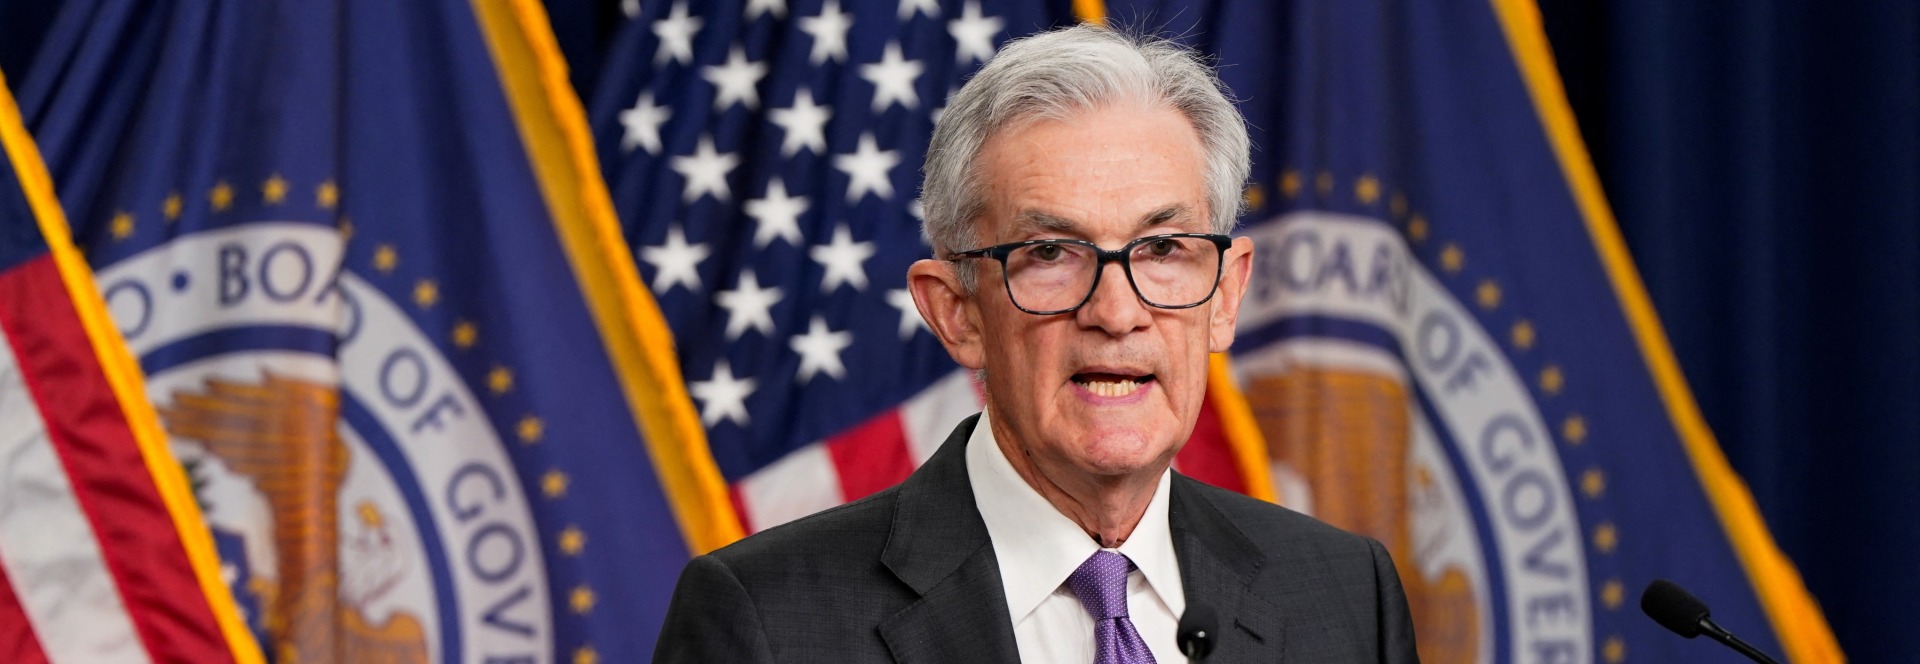 Fed Chair Jerome Powell Signals Caution on Rate Cuts Amid Economic Uncertainty